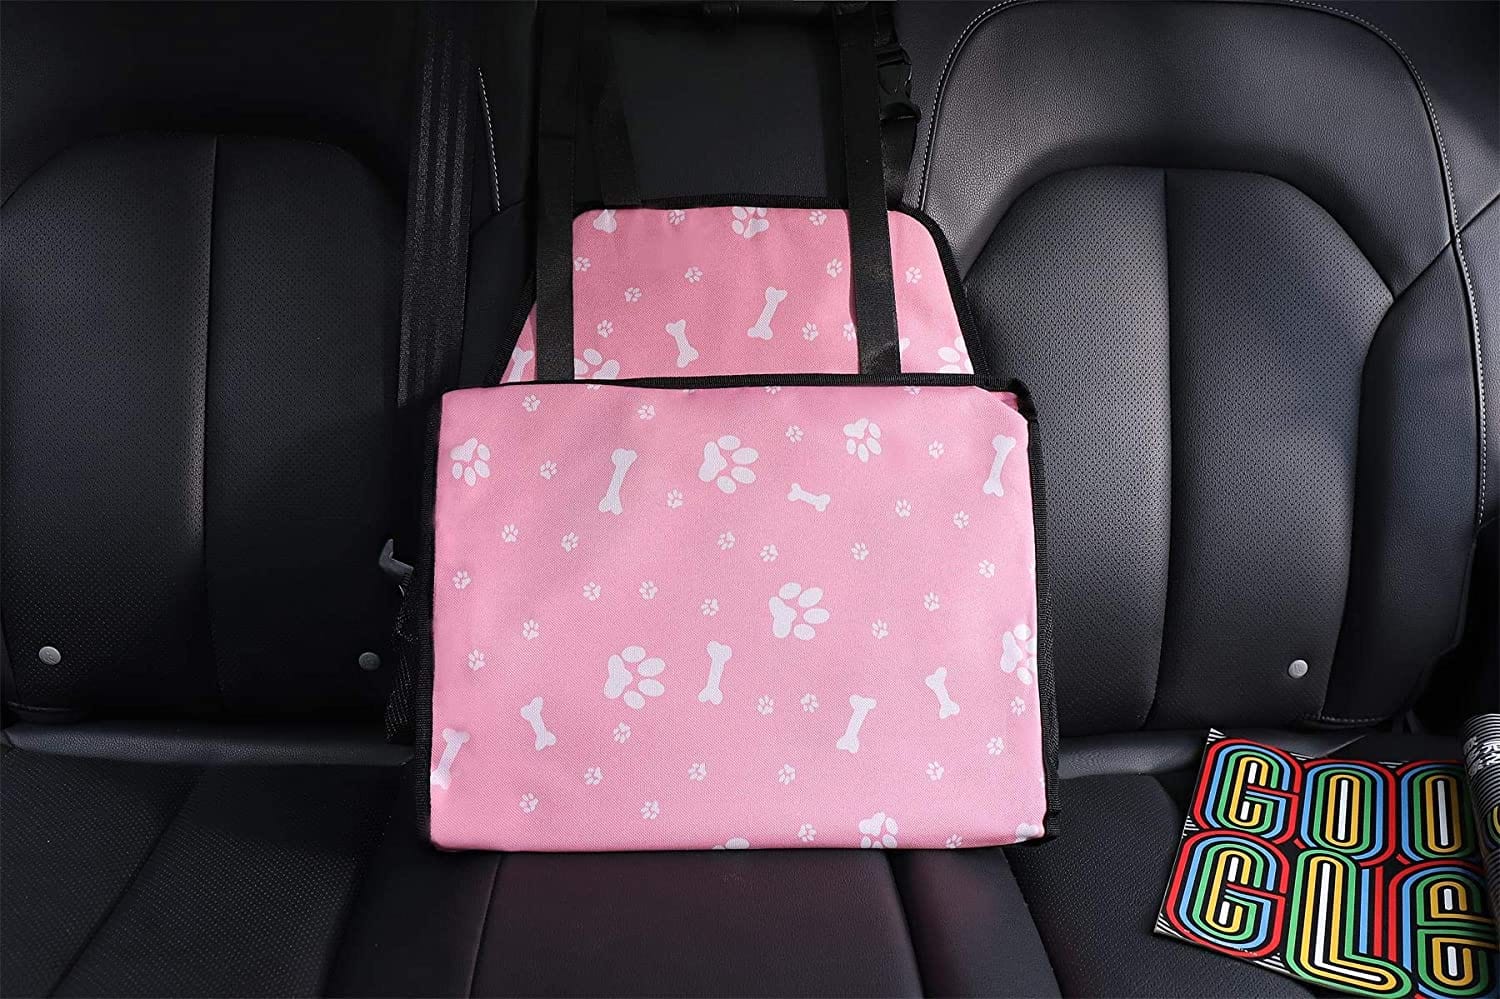 KUTKUT Pet Car Booster Seat Travel Carrier Cage, Oxford Breathable Folding Soft Washable Travel Bags with Seat Belt for Dogs Cats or Other Small Pet (Pink, Size: 40 x 34 x 25cm)-kutkutstyle